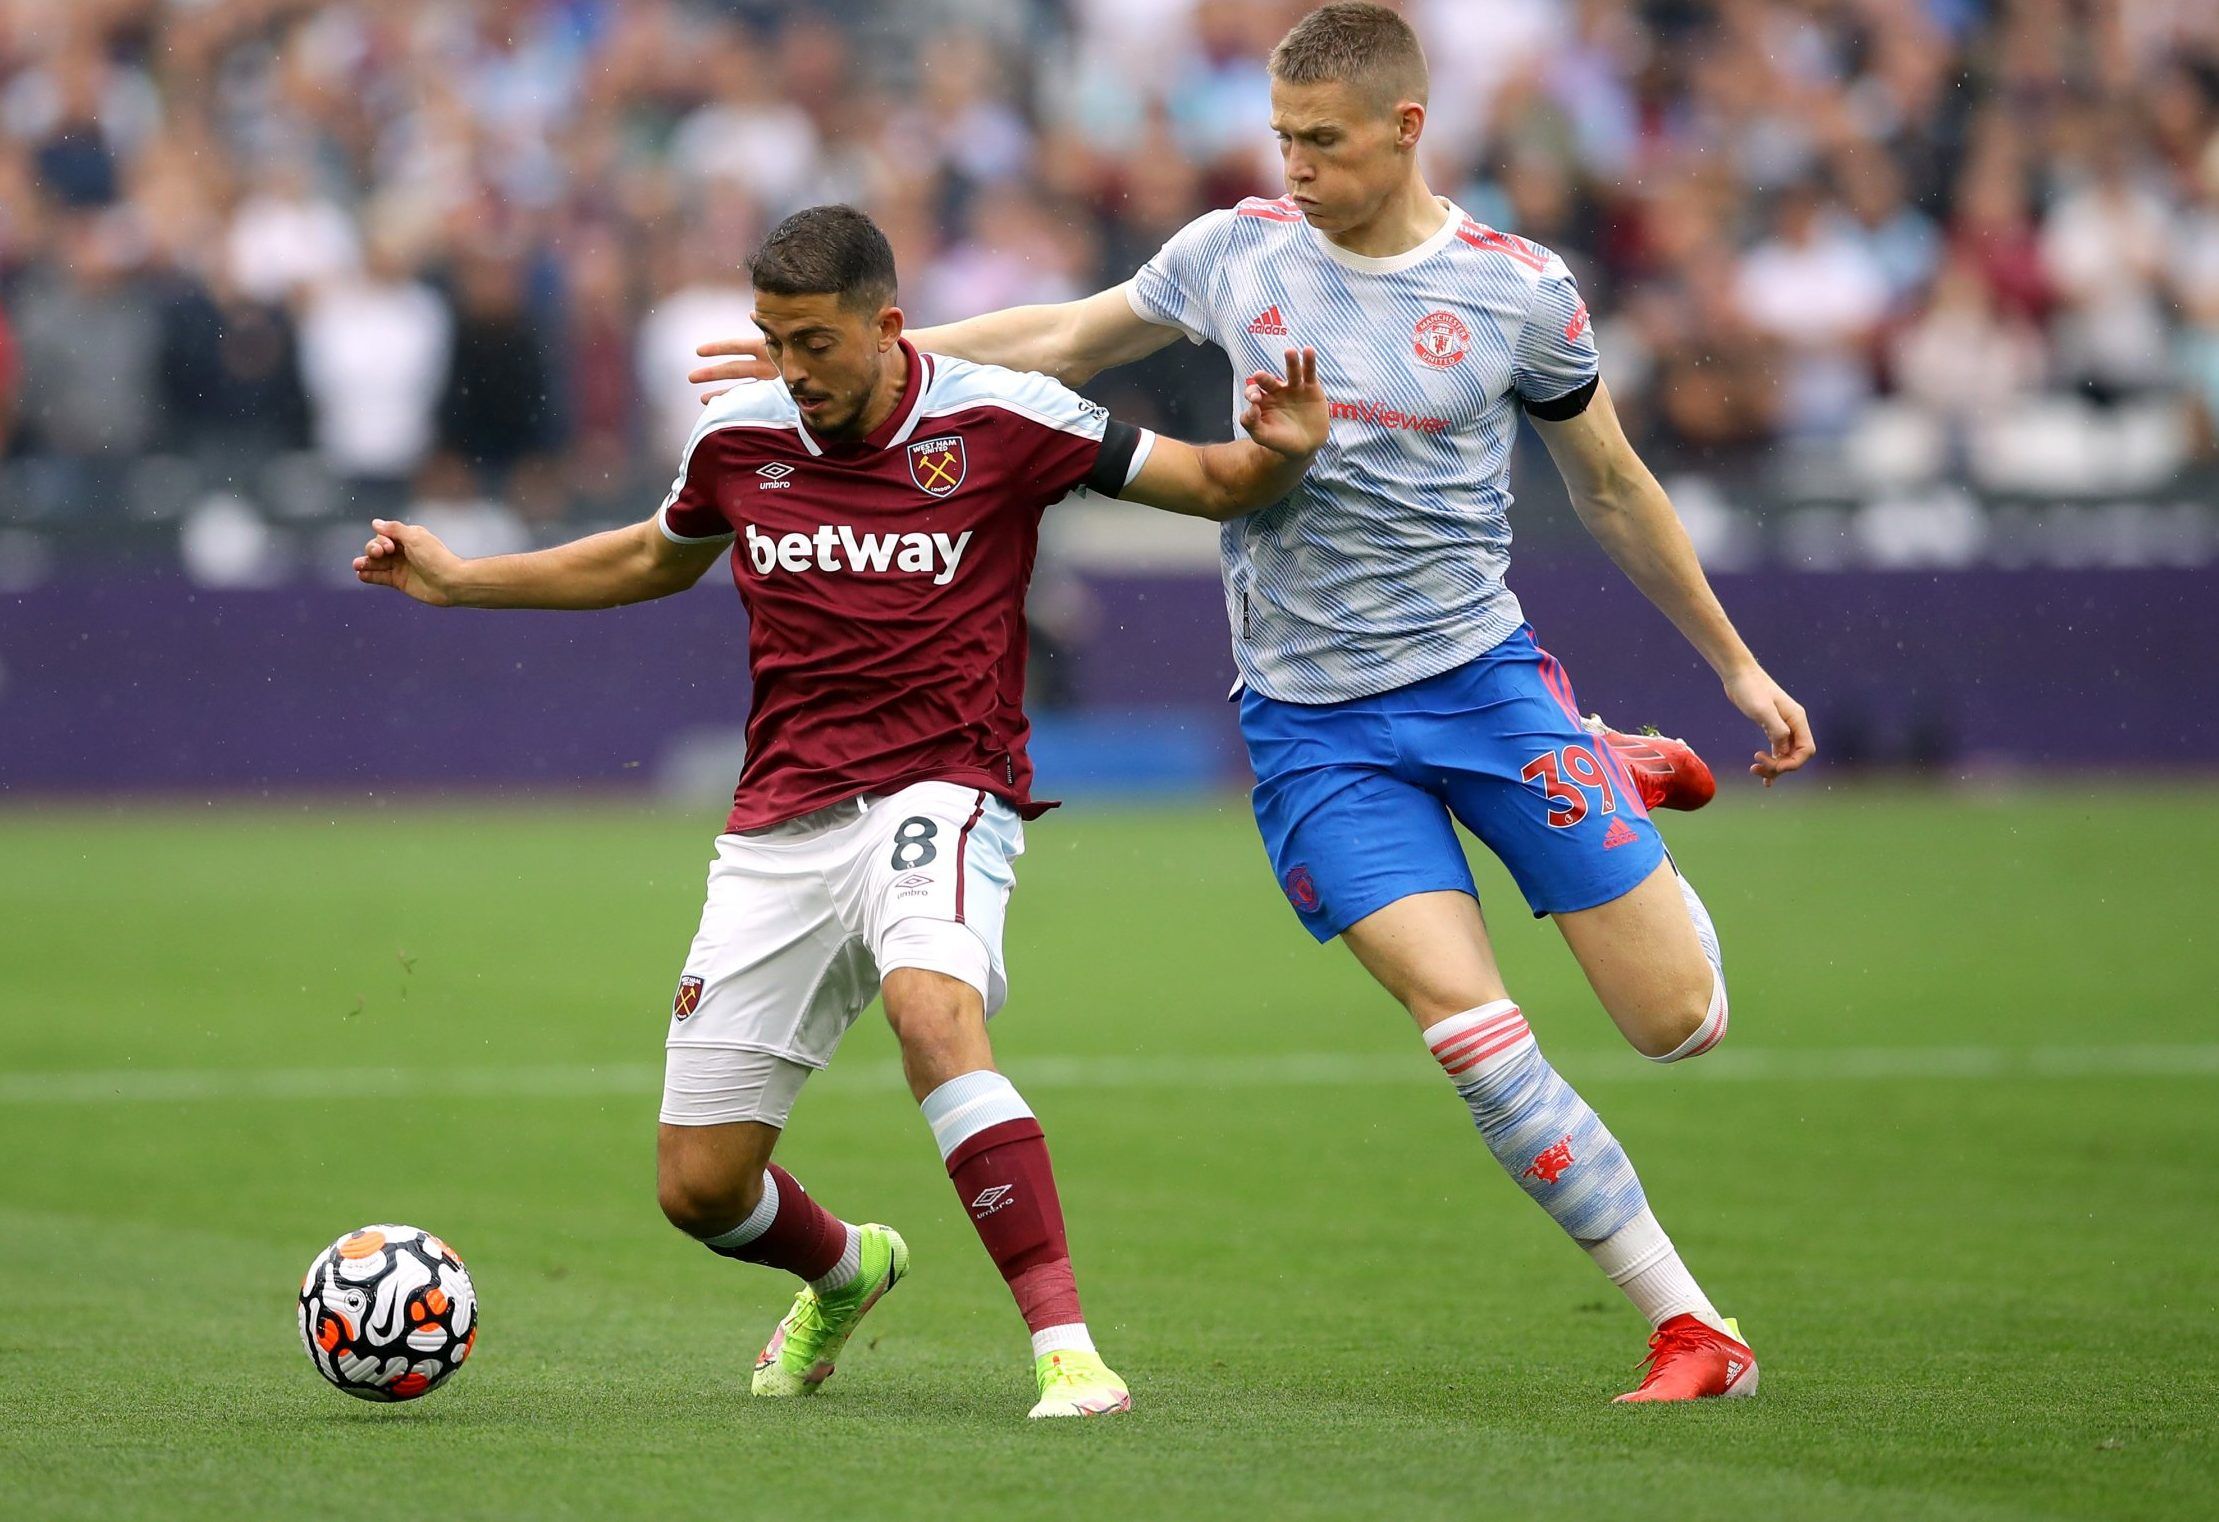 West Ham midfielder Pablo Fornals in action against Manchester United in the Premier League